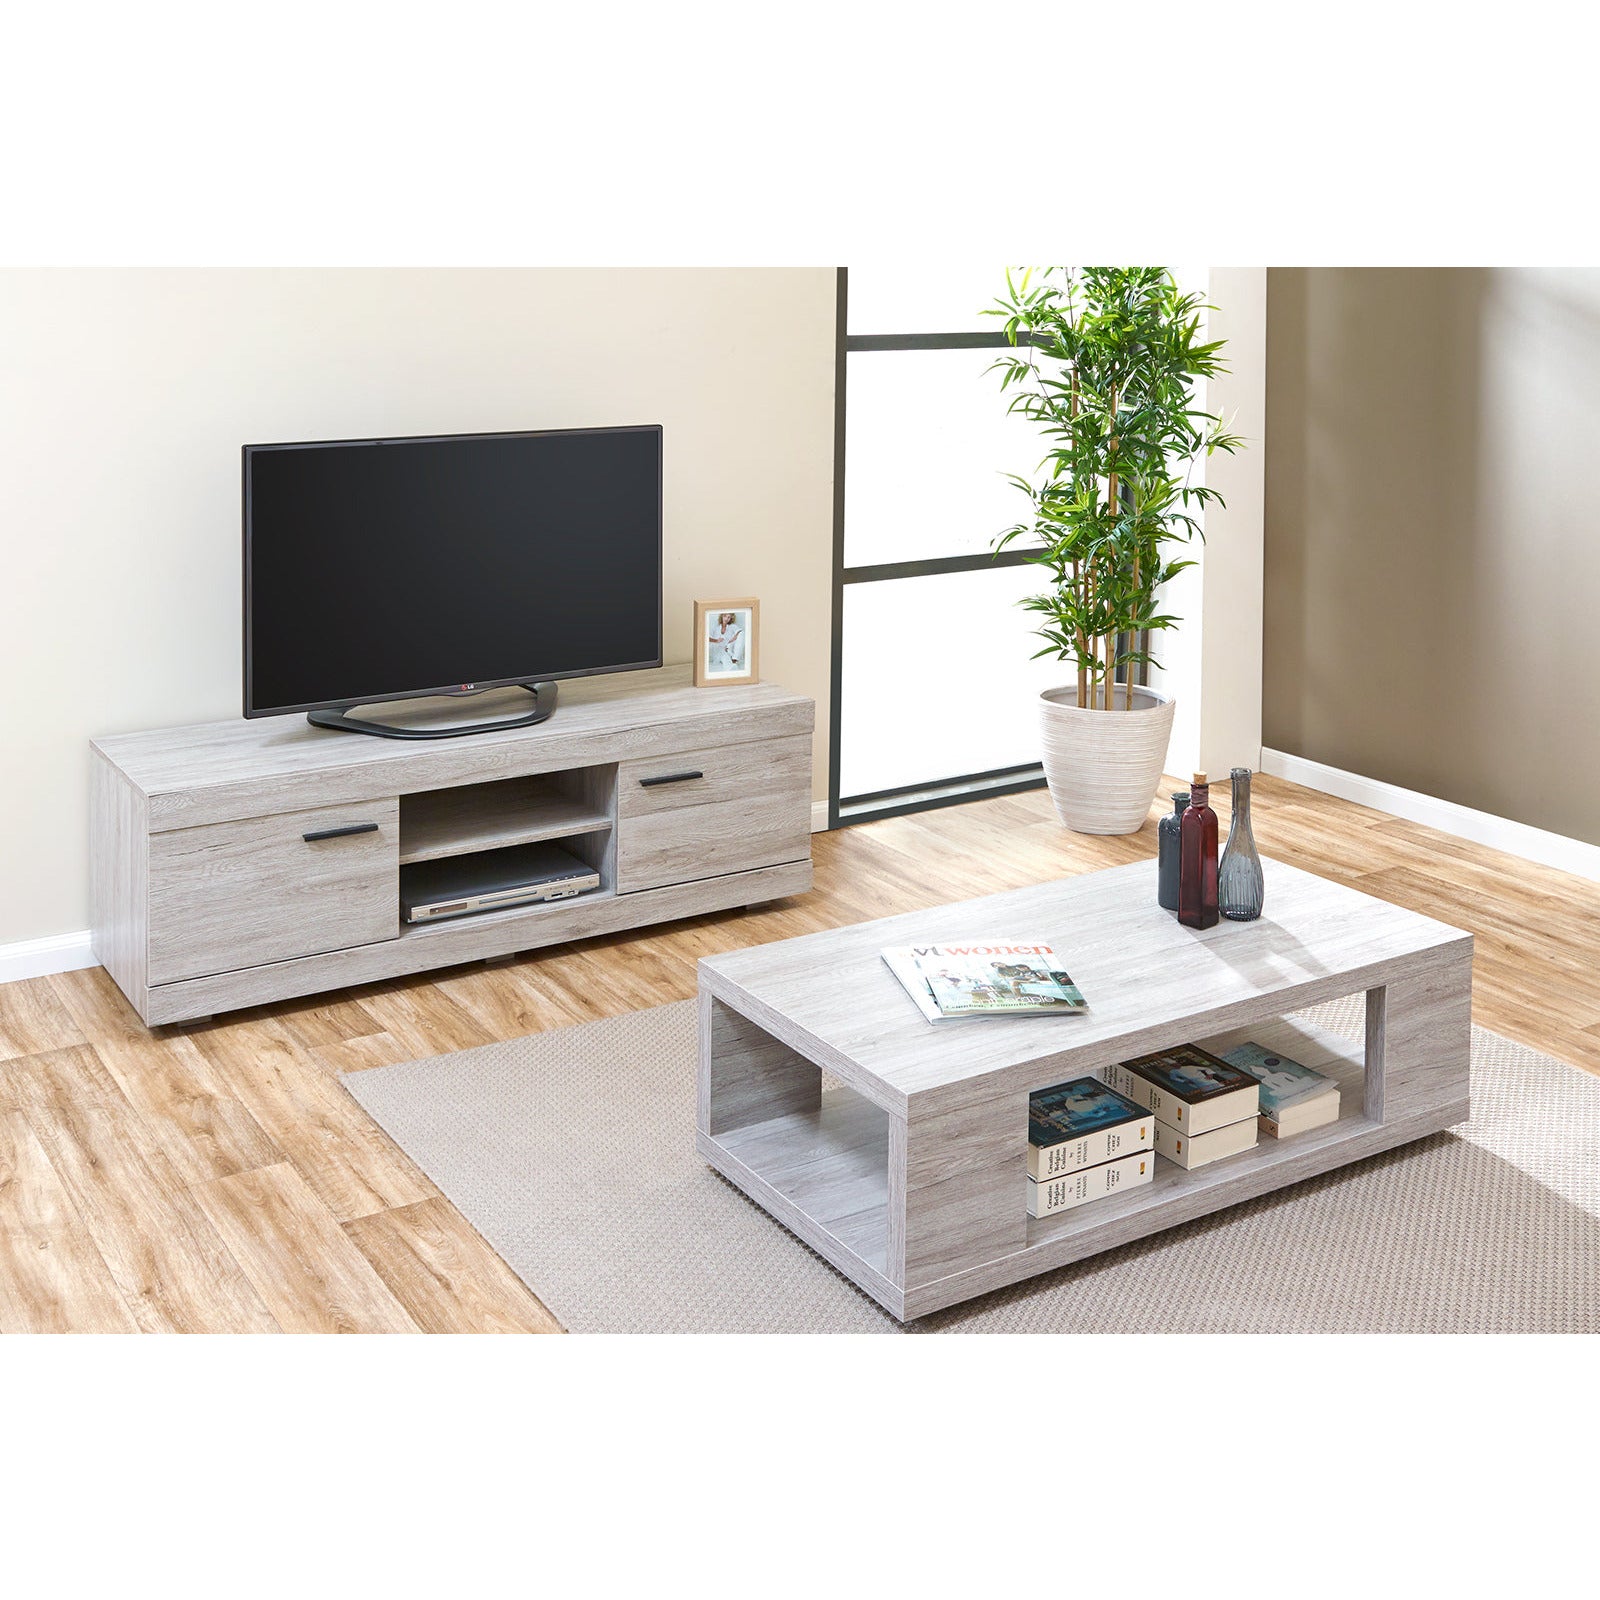 Coffee table | Furniture series Thoma | light gray, natural | 120x